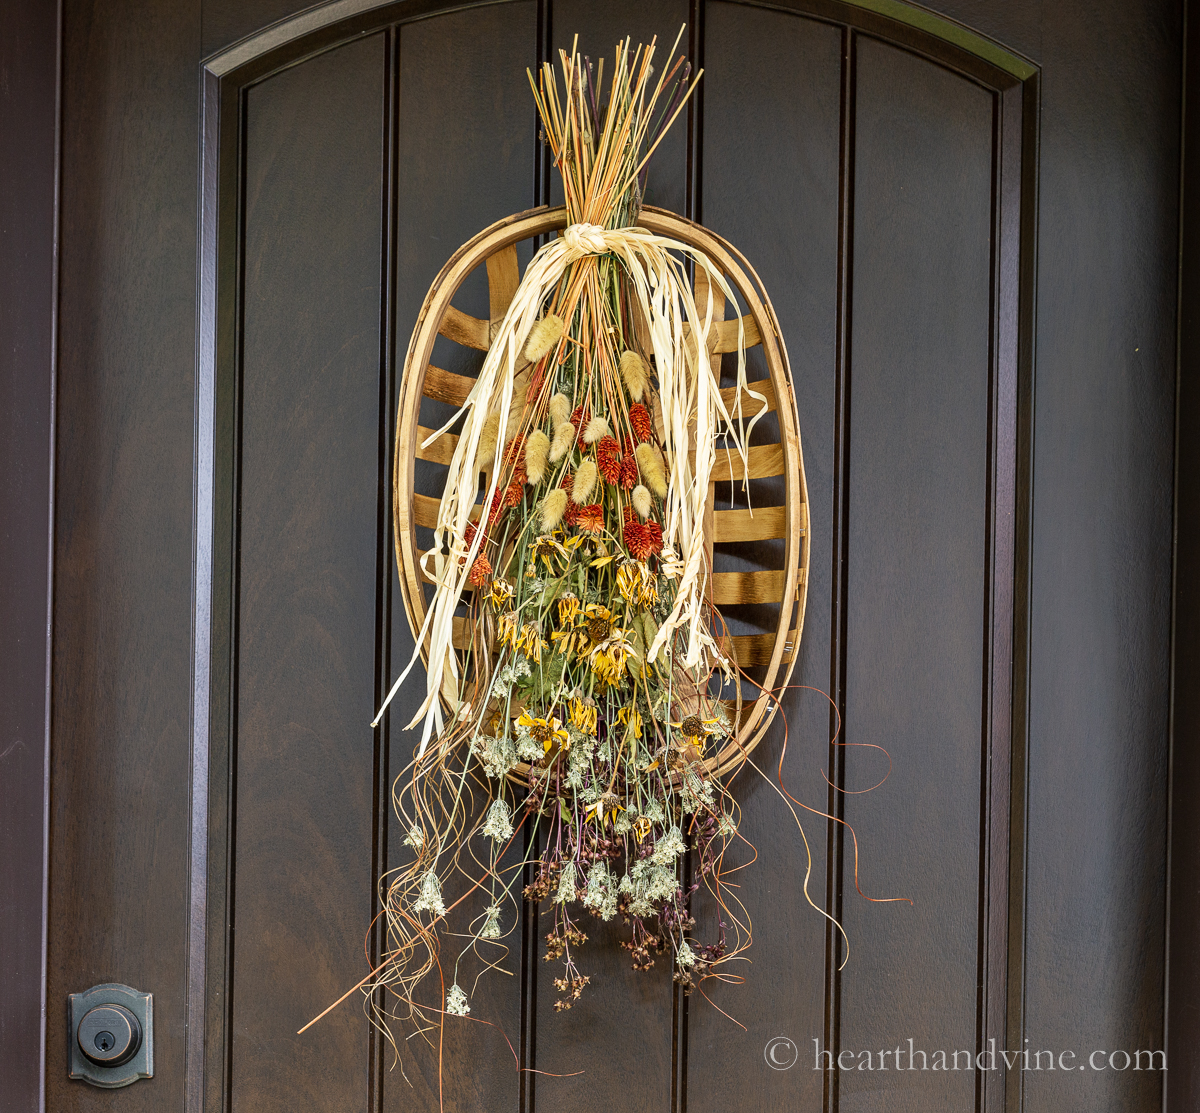 Dried flowers and grasses gathered with raffia and tied to a tobacco basket hanging on a brown door.